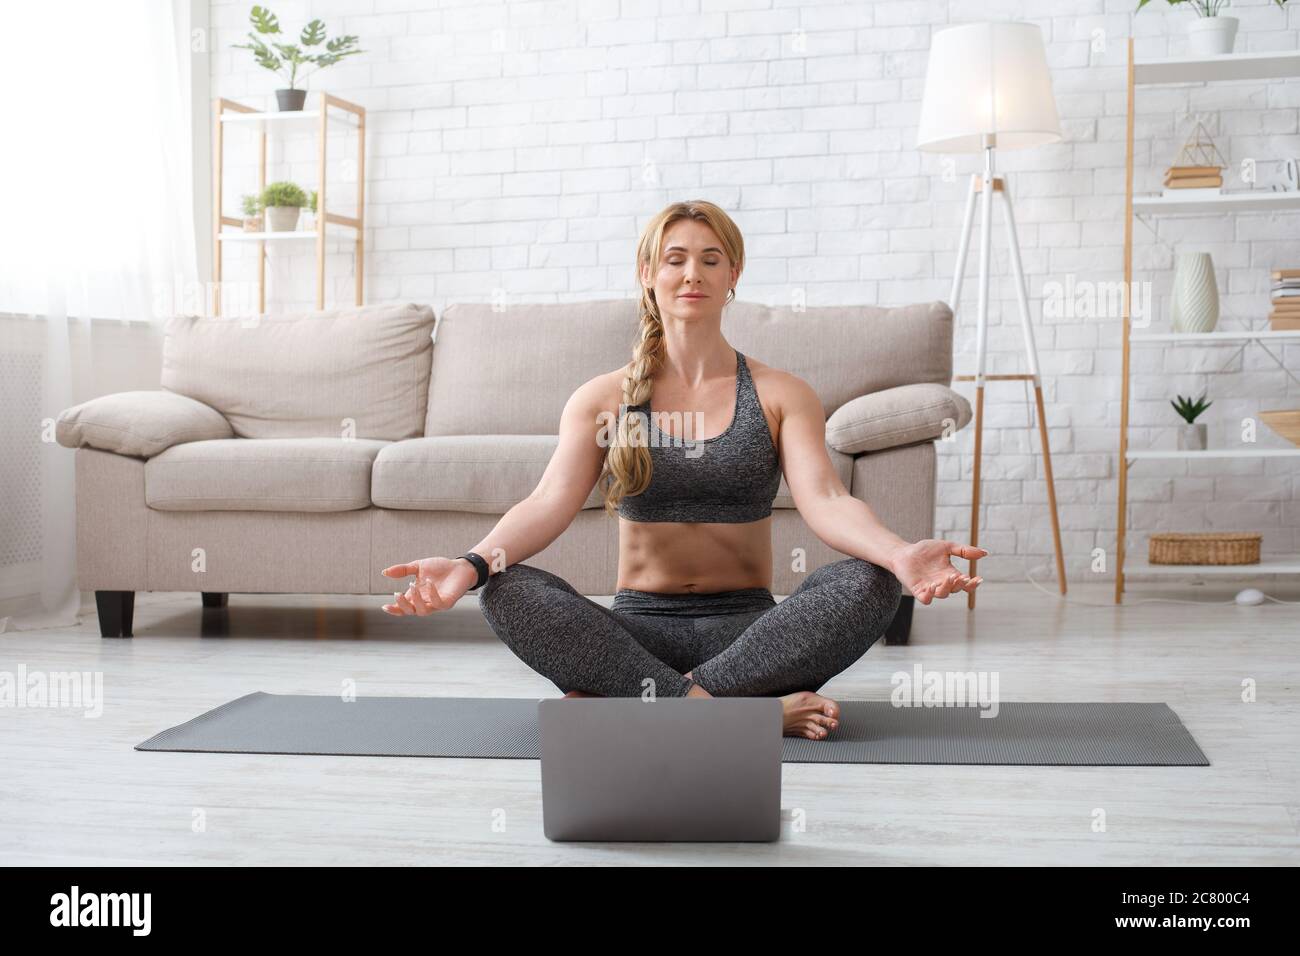 Online trainer practicing yoga. Woman in lotus pose with closed eyes, meditation on mat on floor Stock Photo